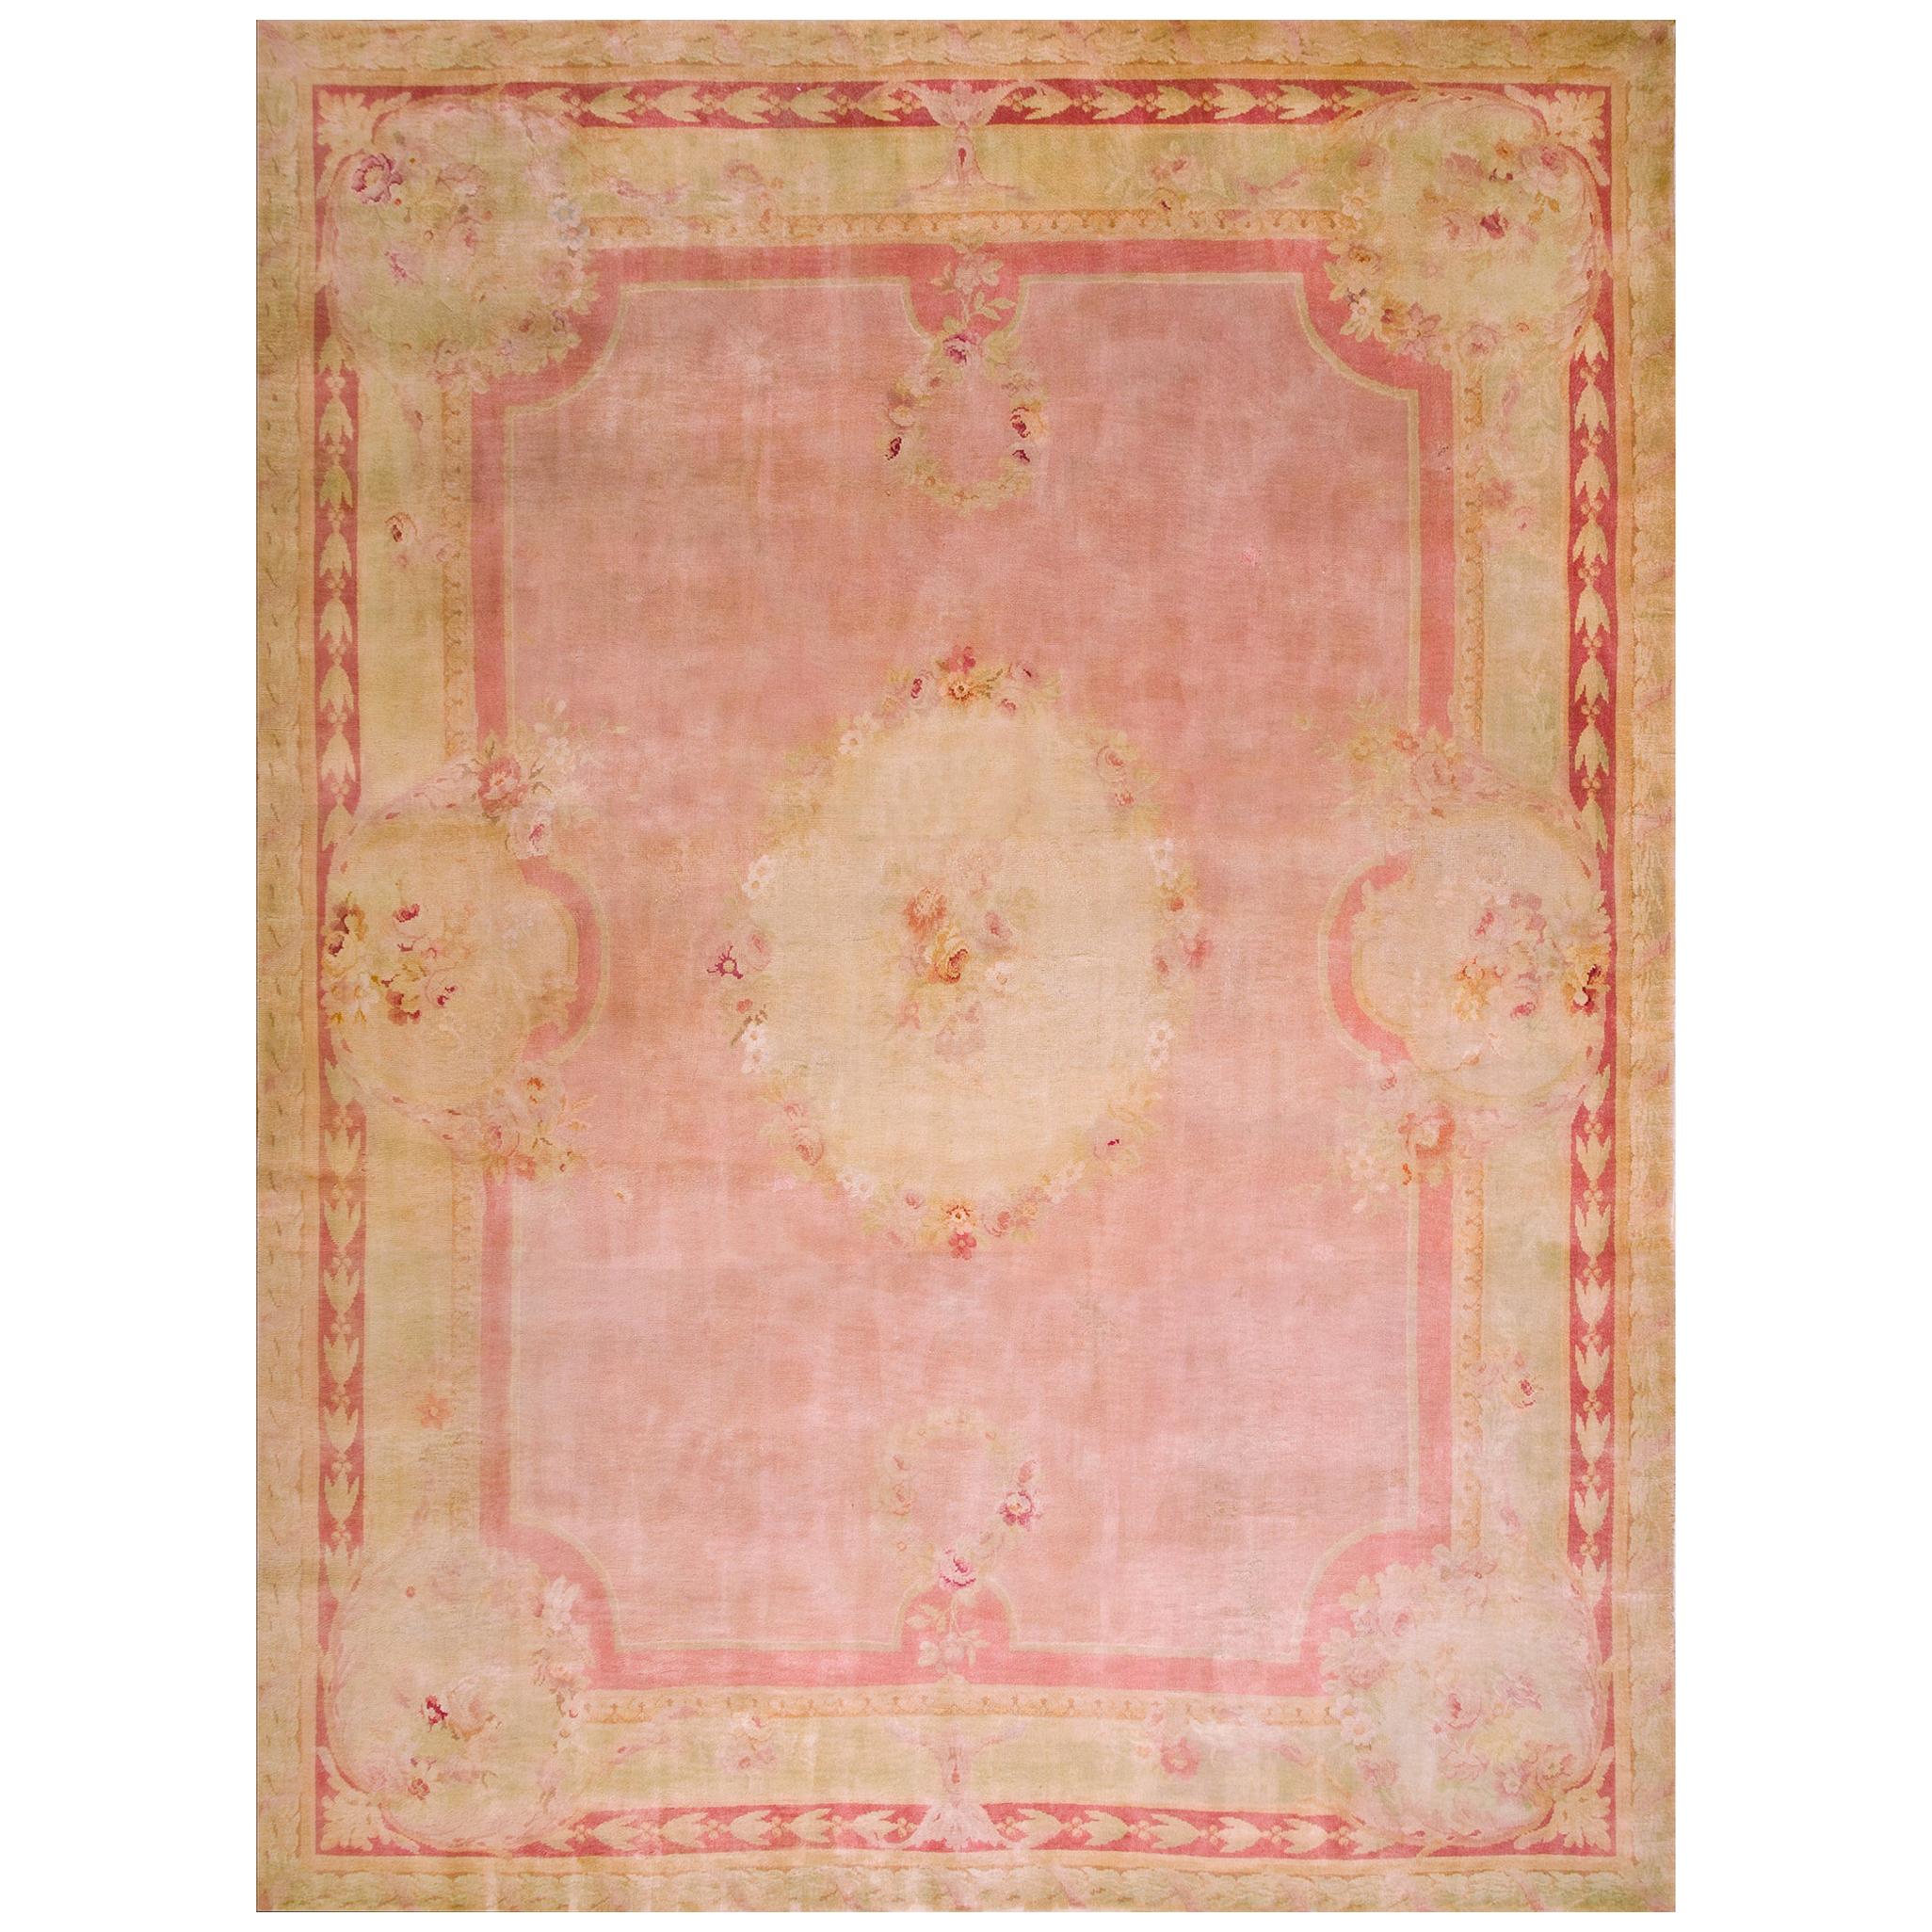 Early 20th Century French  Savonnerie Carpet ( 11' x 16'6" - 360 x 503 )